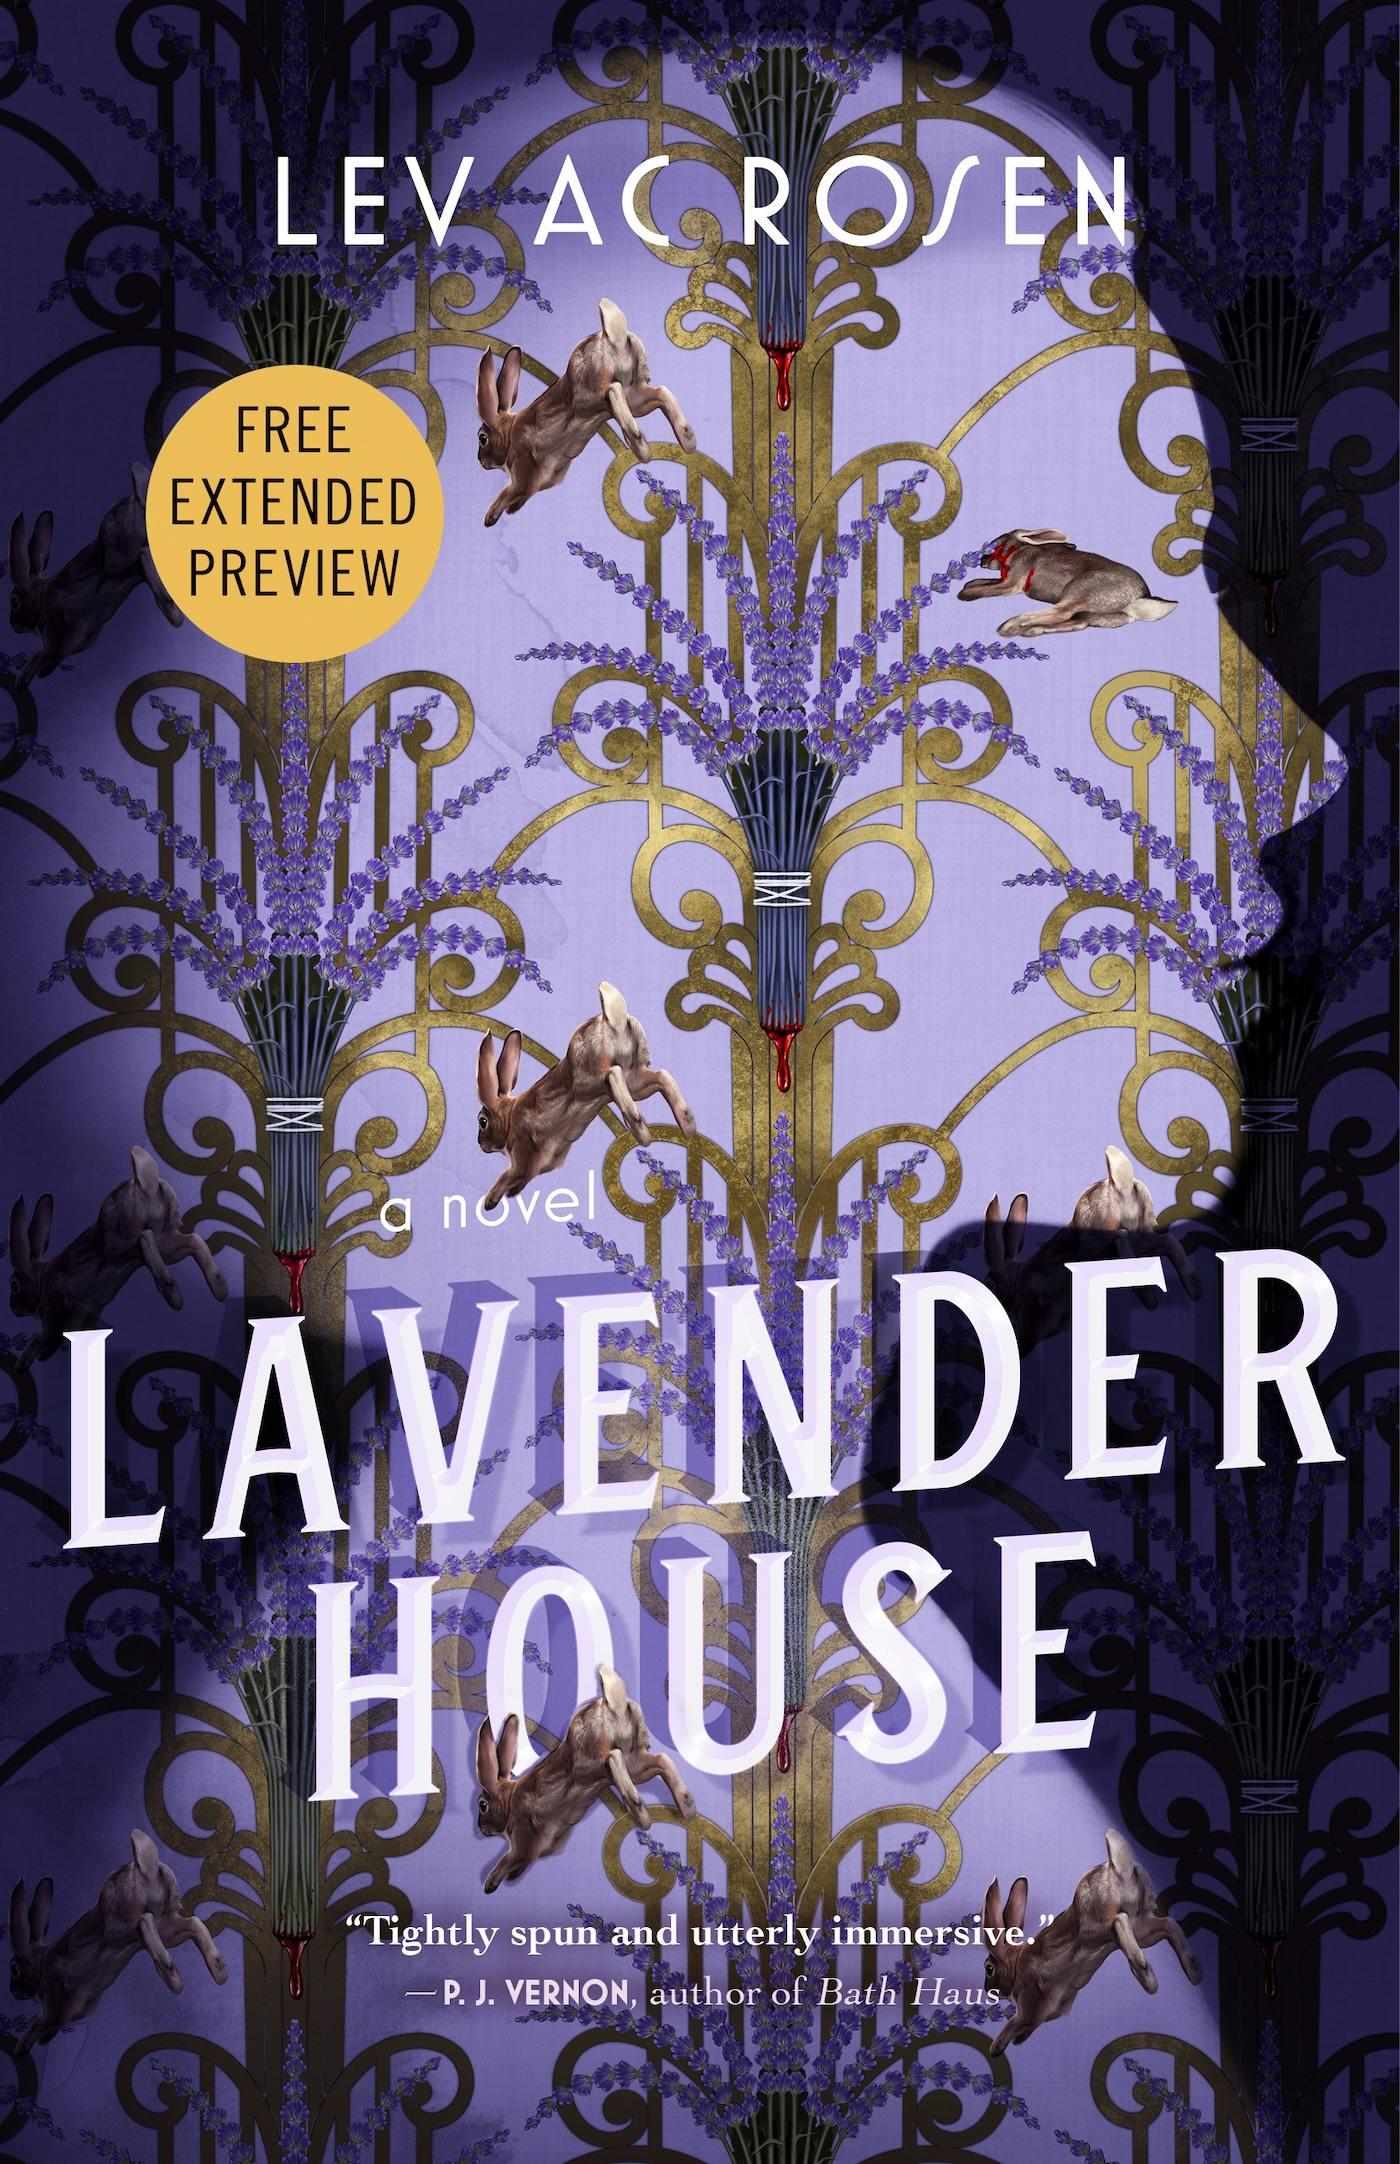 Cover for the book titled as: Lavender House Sneak Peek